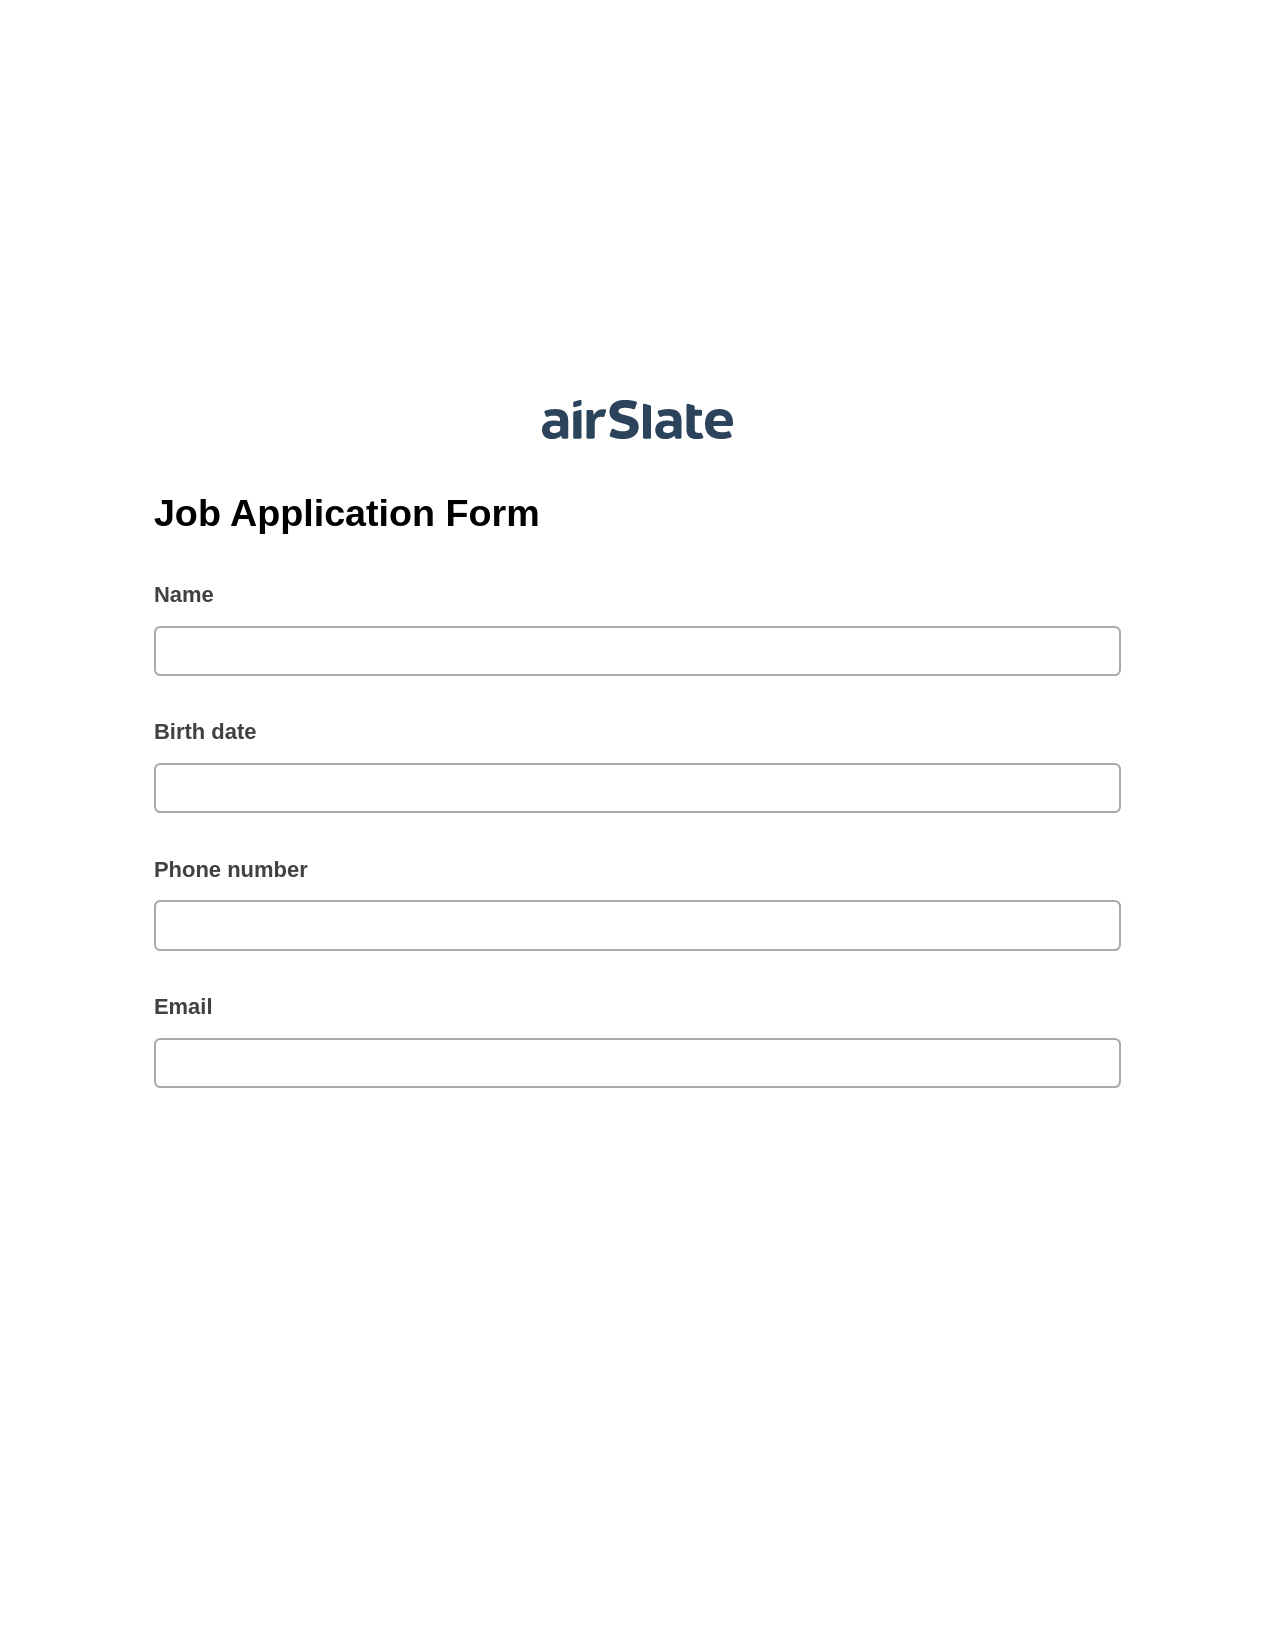 Multirole Job Application Form Pre-fill Dropdown from Airtable, Audit Trail Bot, Box Bot